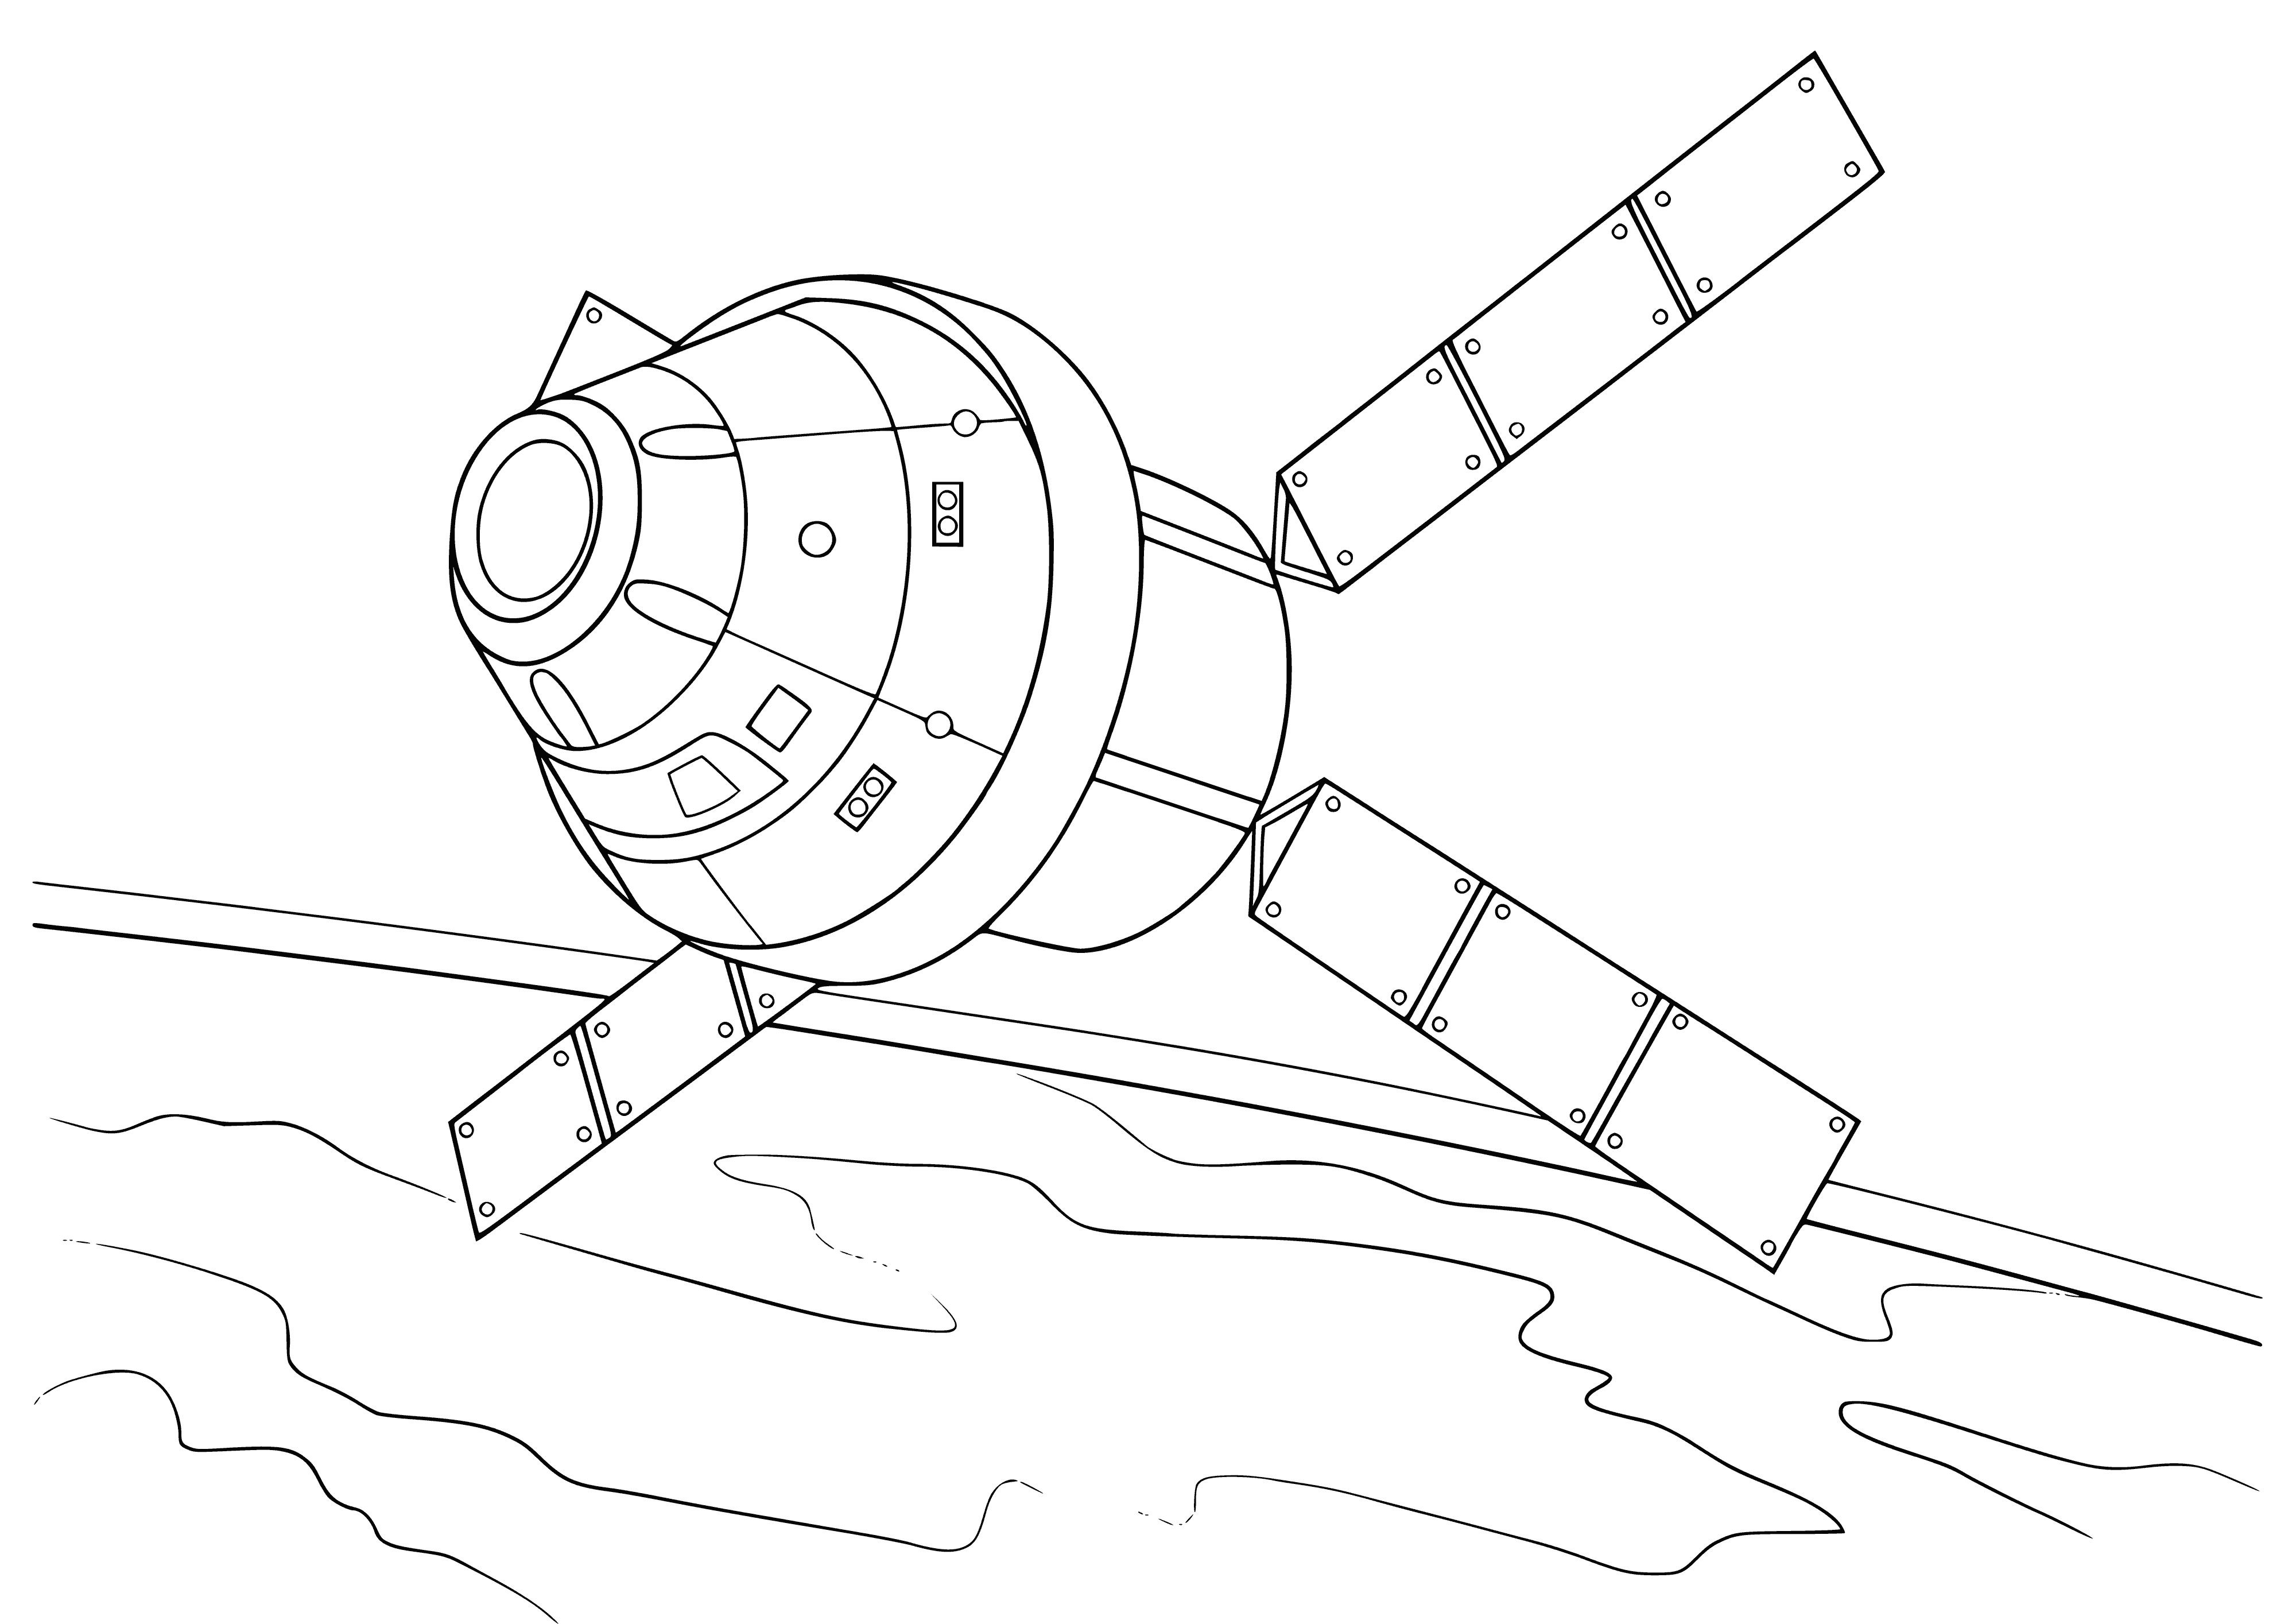 coloring page: Round obj. in center, many thin pieces radiating, sm. obj. in center, black background.